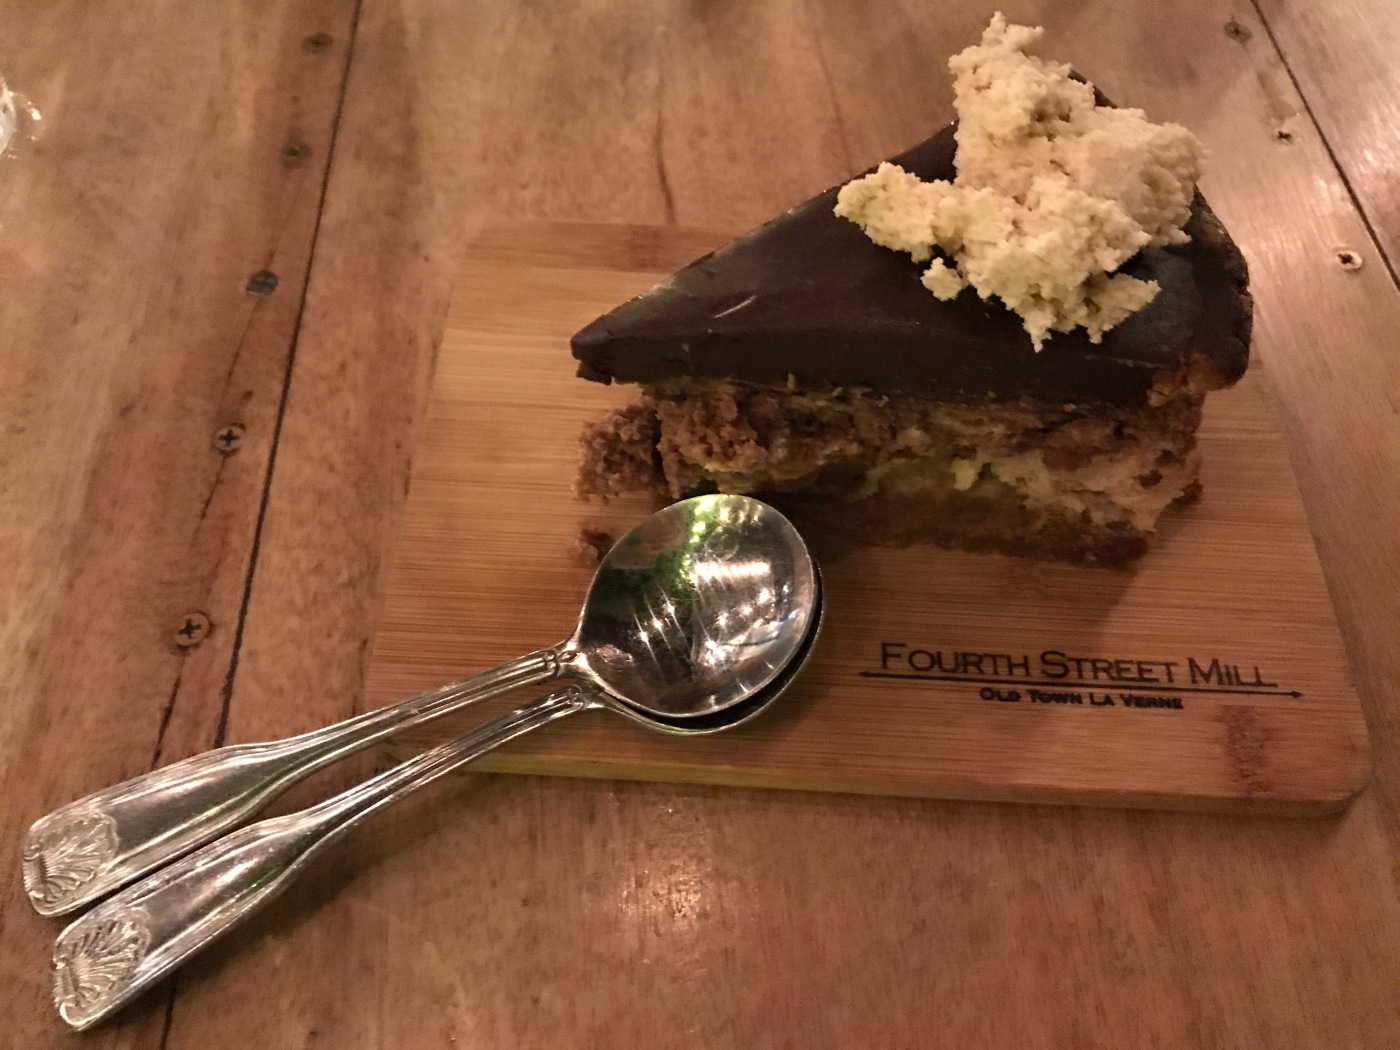 A Slice of Chocolate Peanut Butter Cheesecake Sits Beside Two Spoons at Fourth Street Mill in La Verne, California